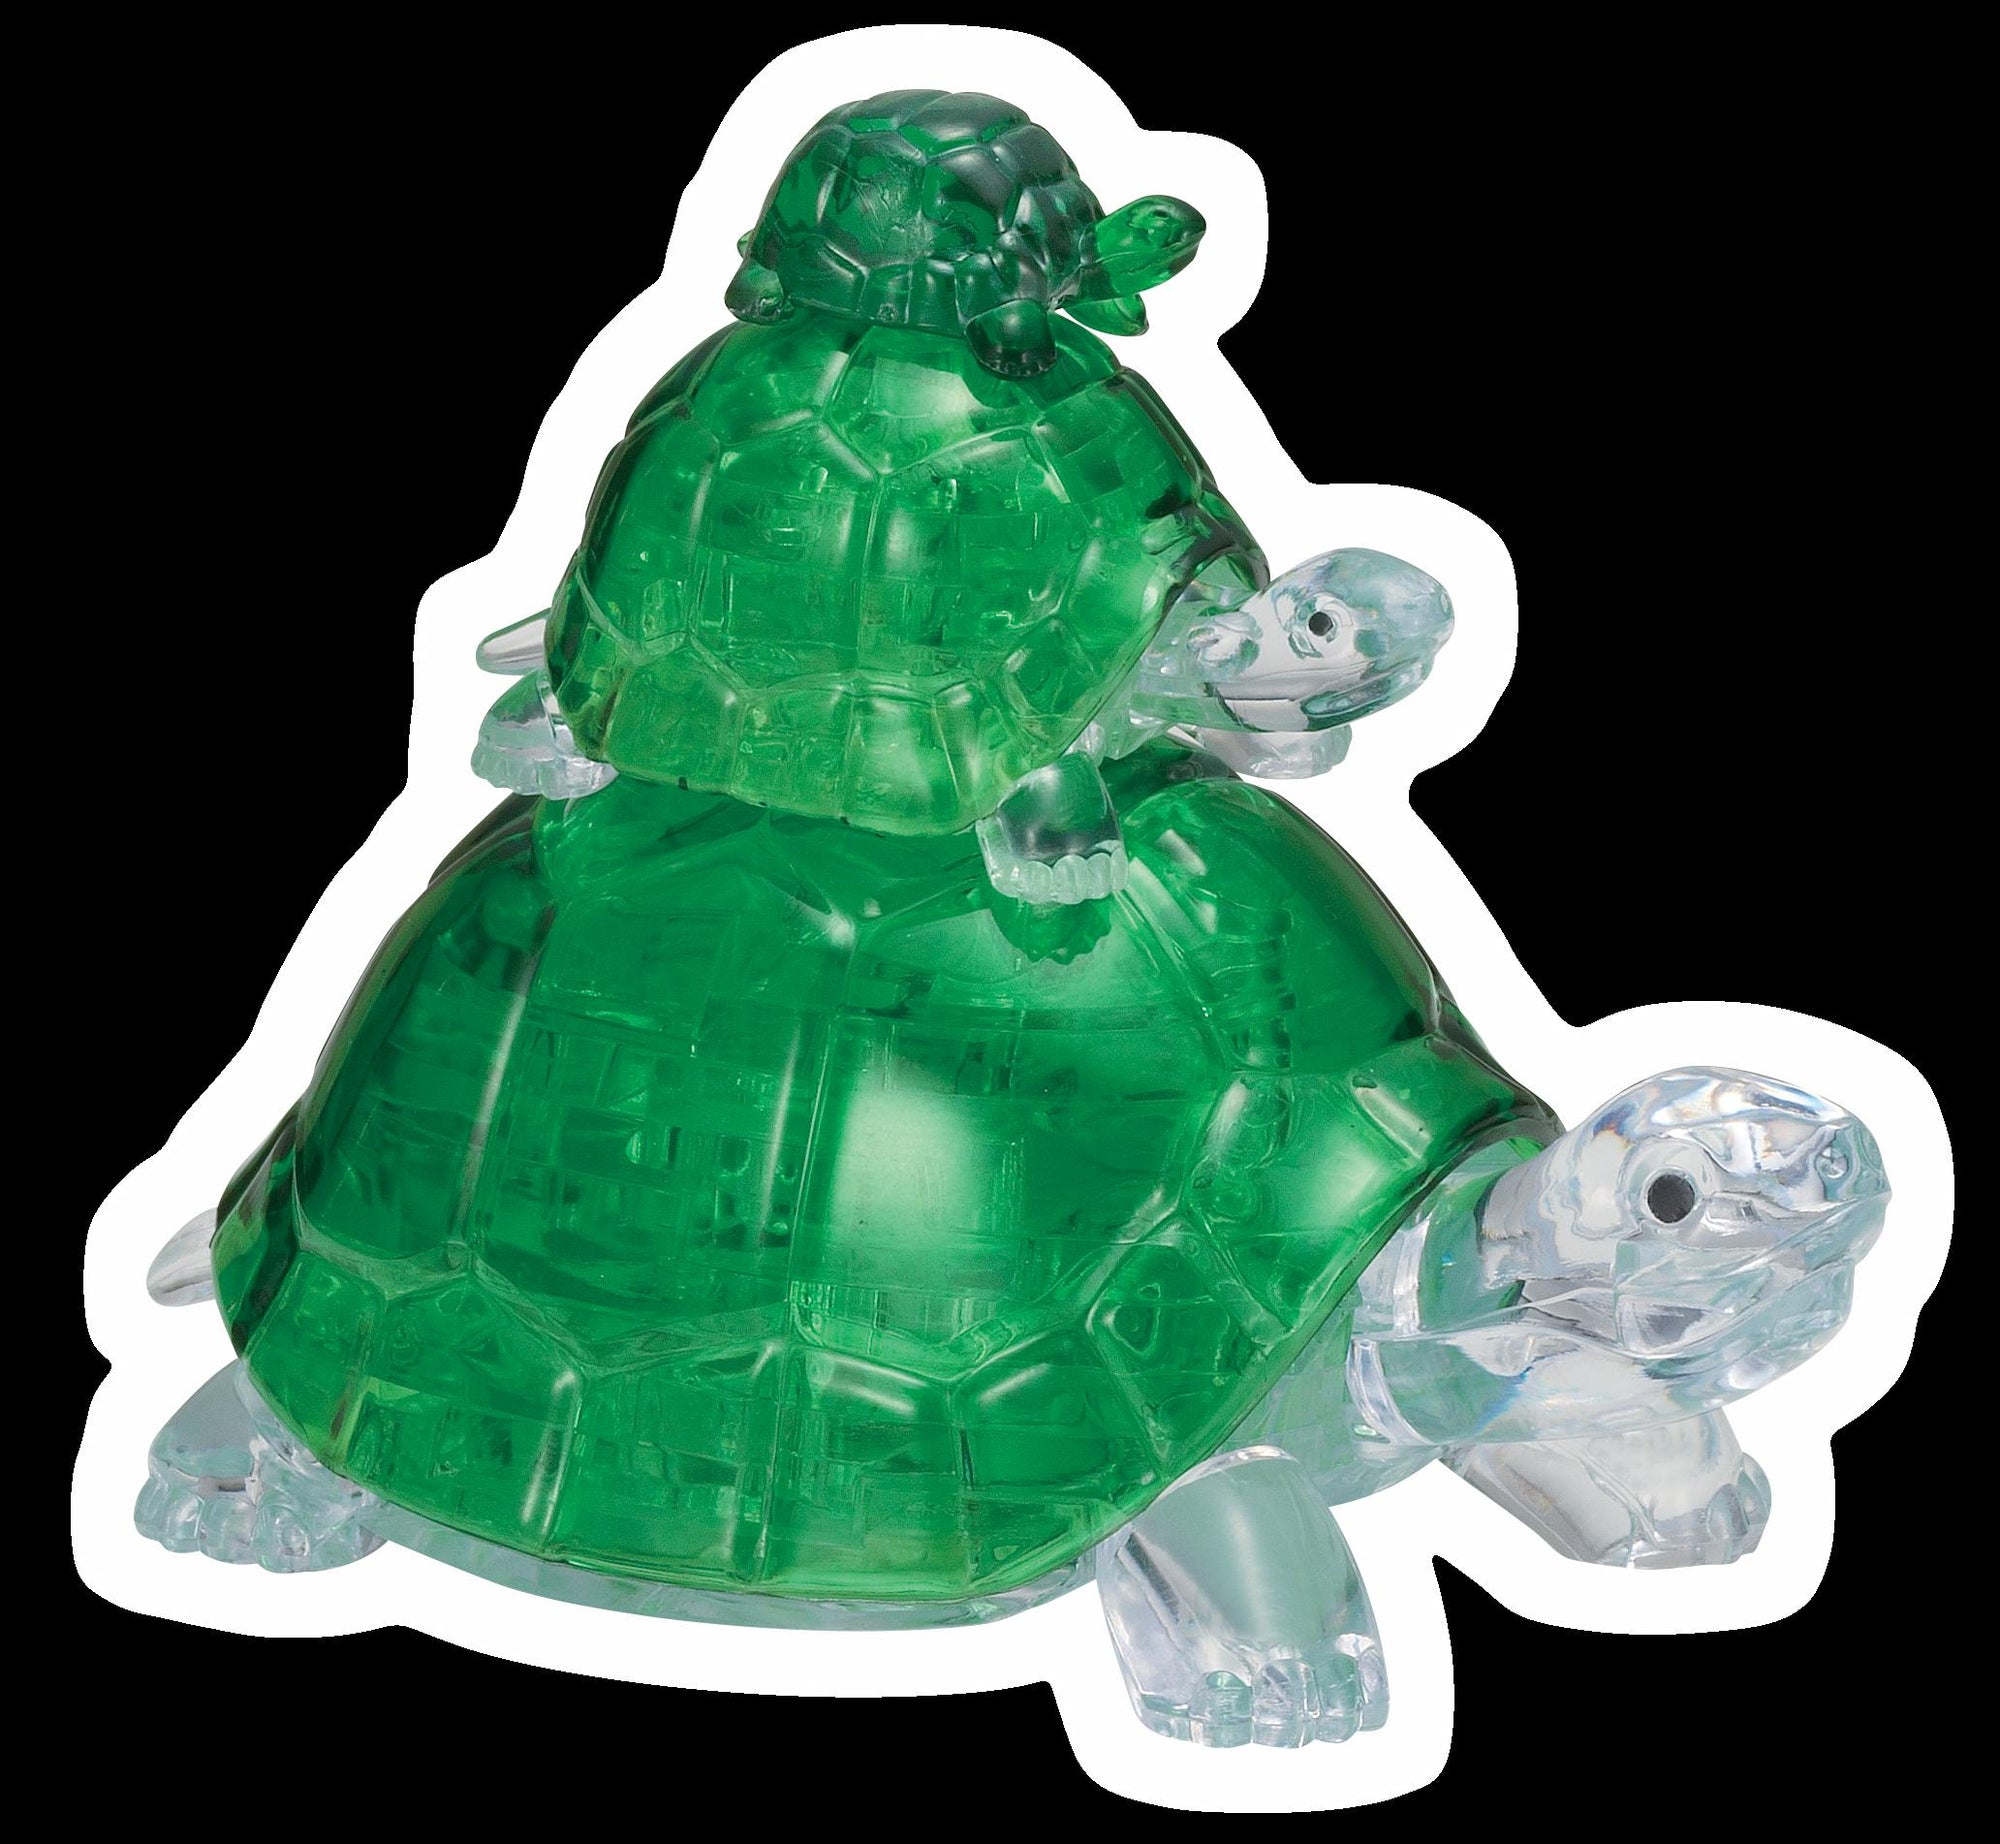 3D Crystal Puzzle - Turtles - Good Games